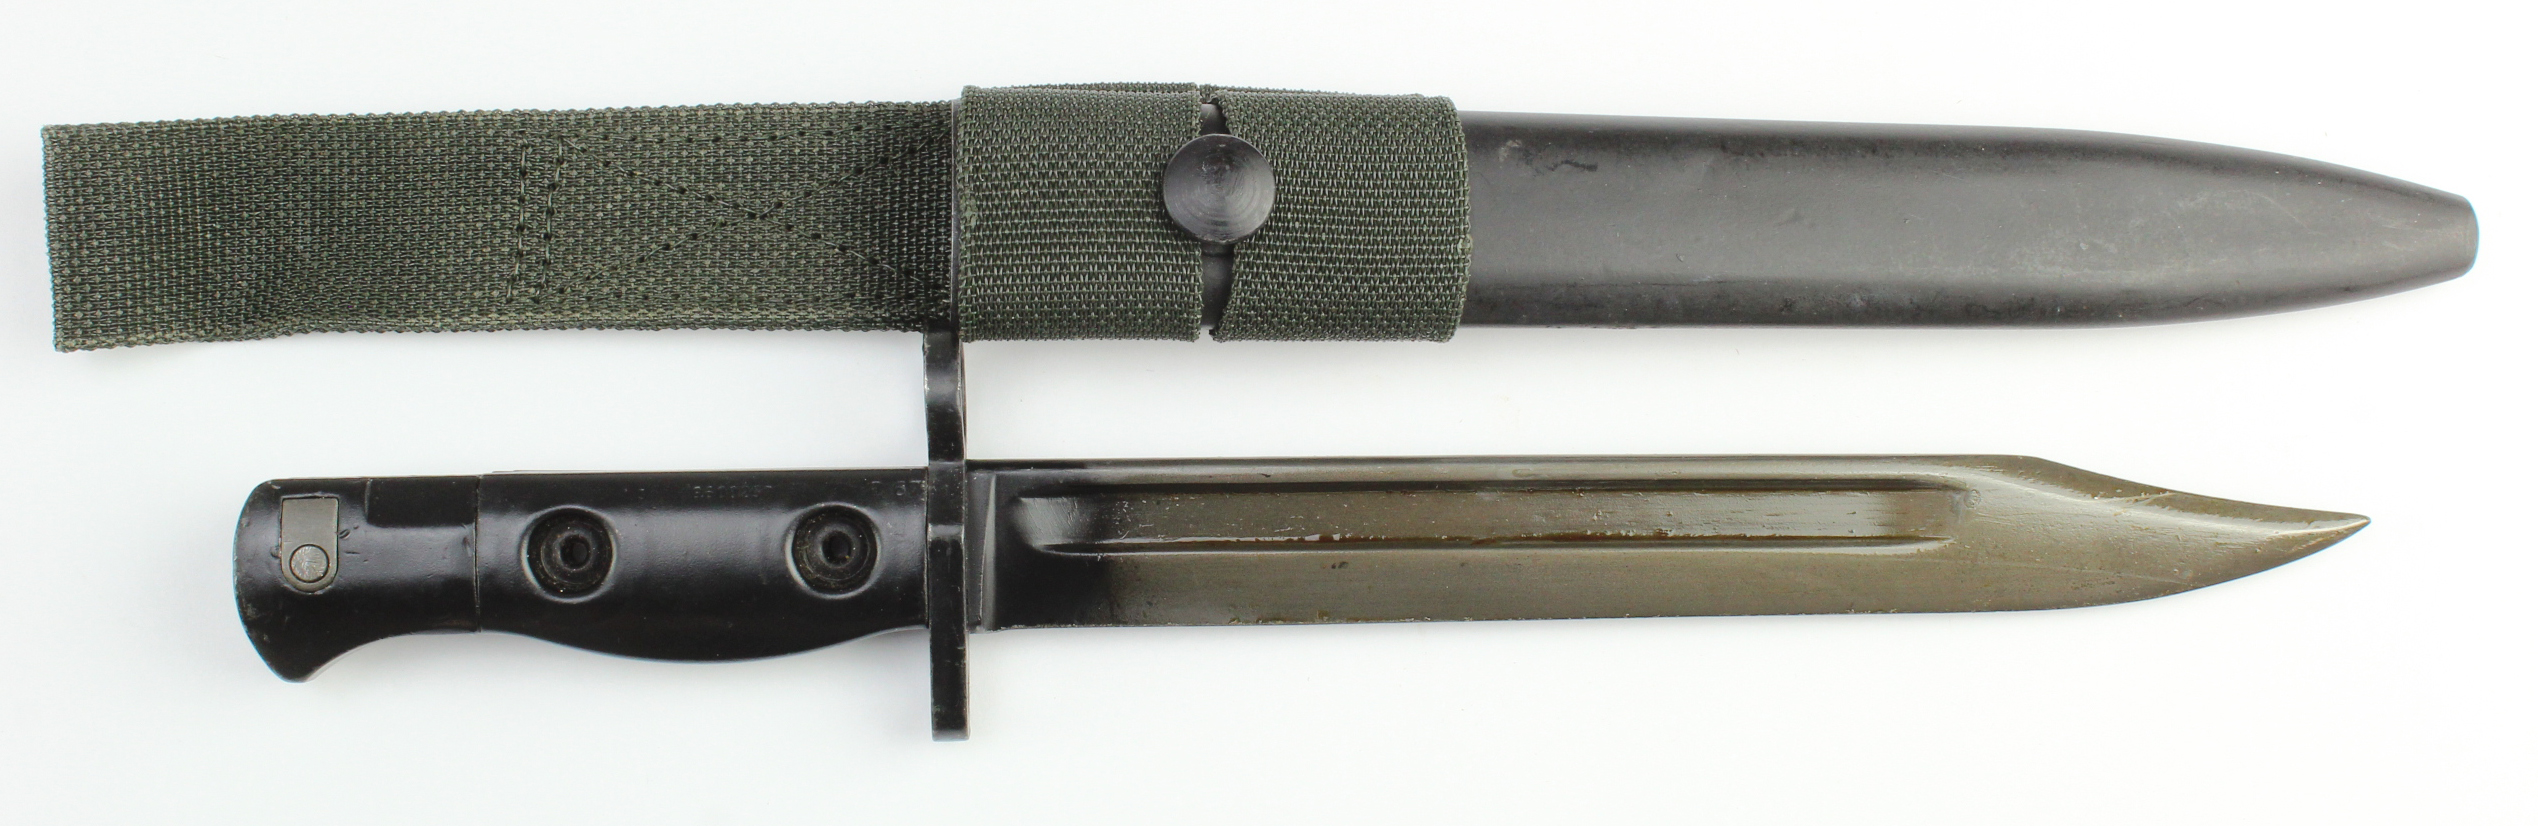 Bayonet, a U.K. L1A3 by BSA in 1967 for FN. FAL L1A1 Rifle, in its steel scabbard, with nylon